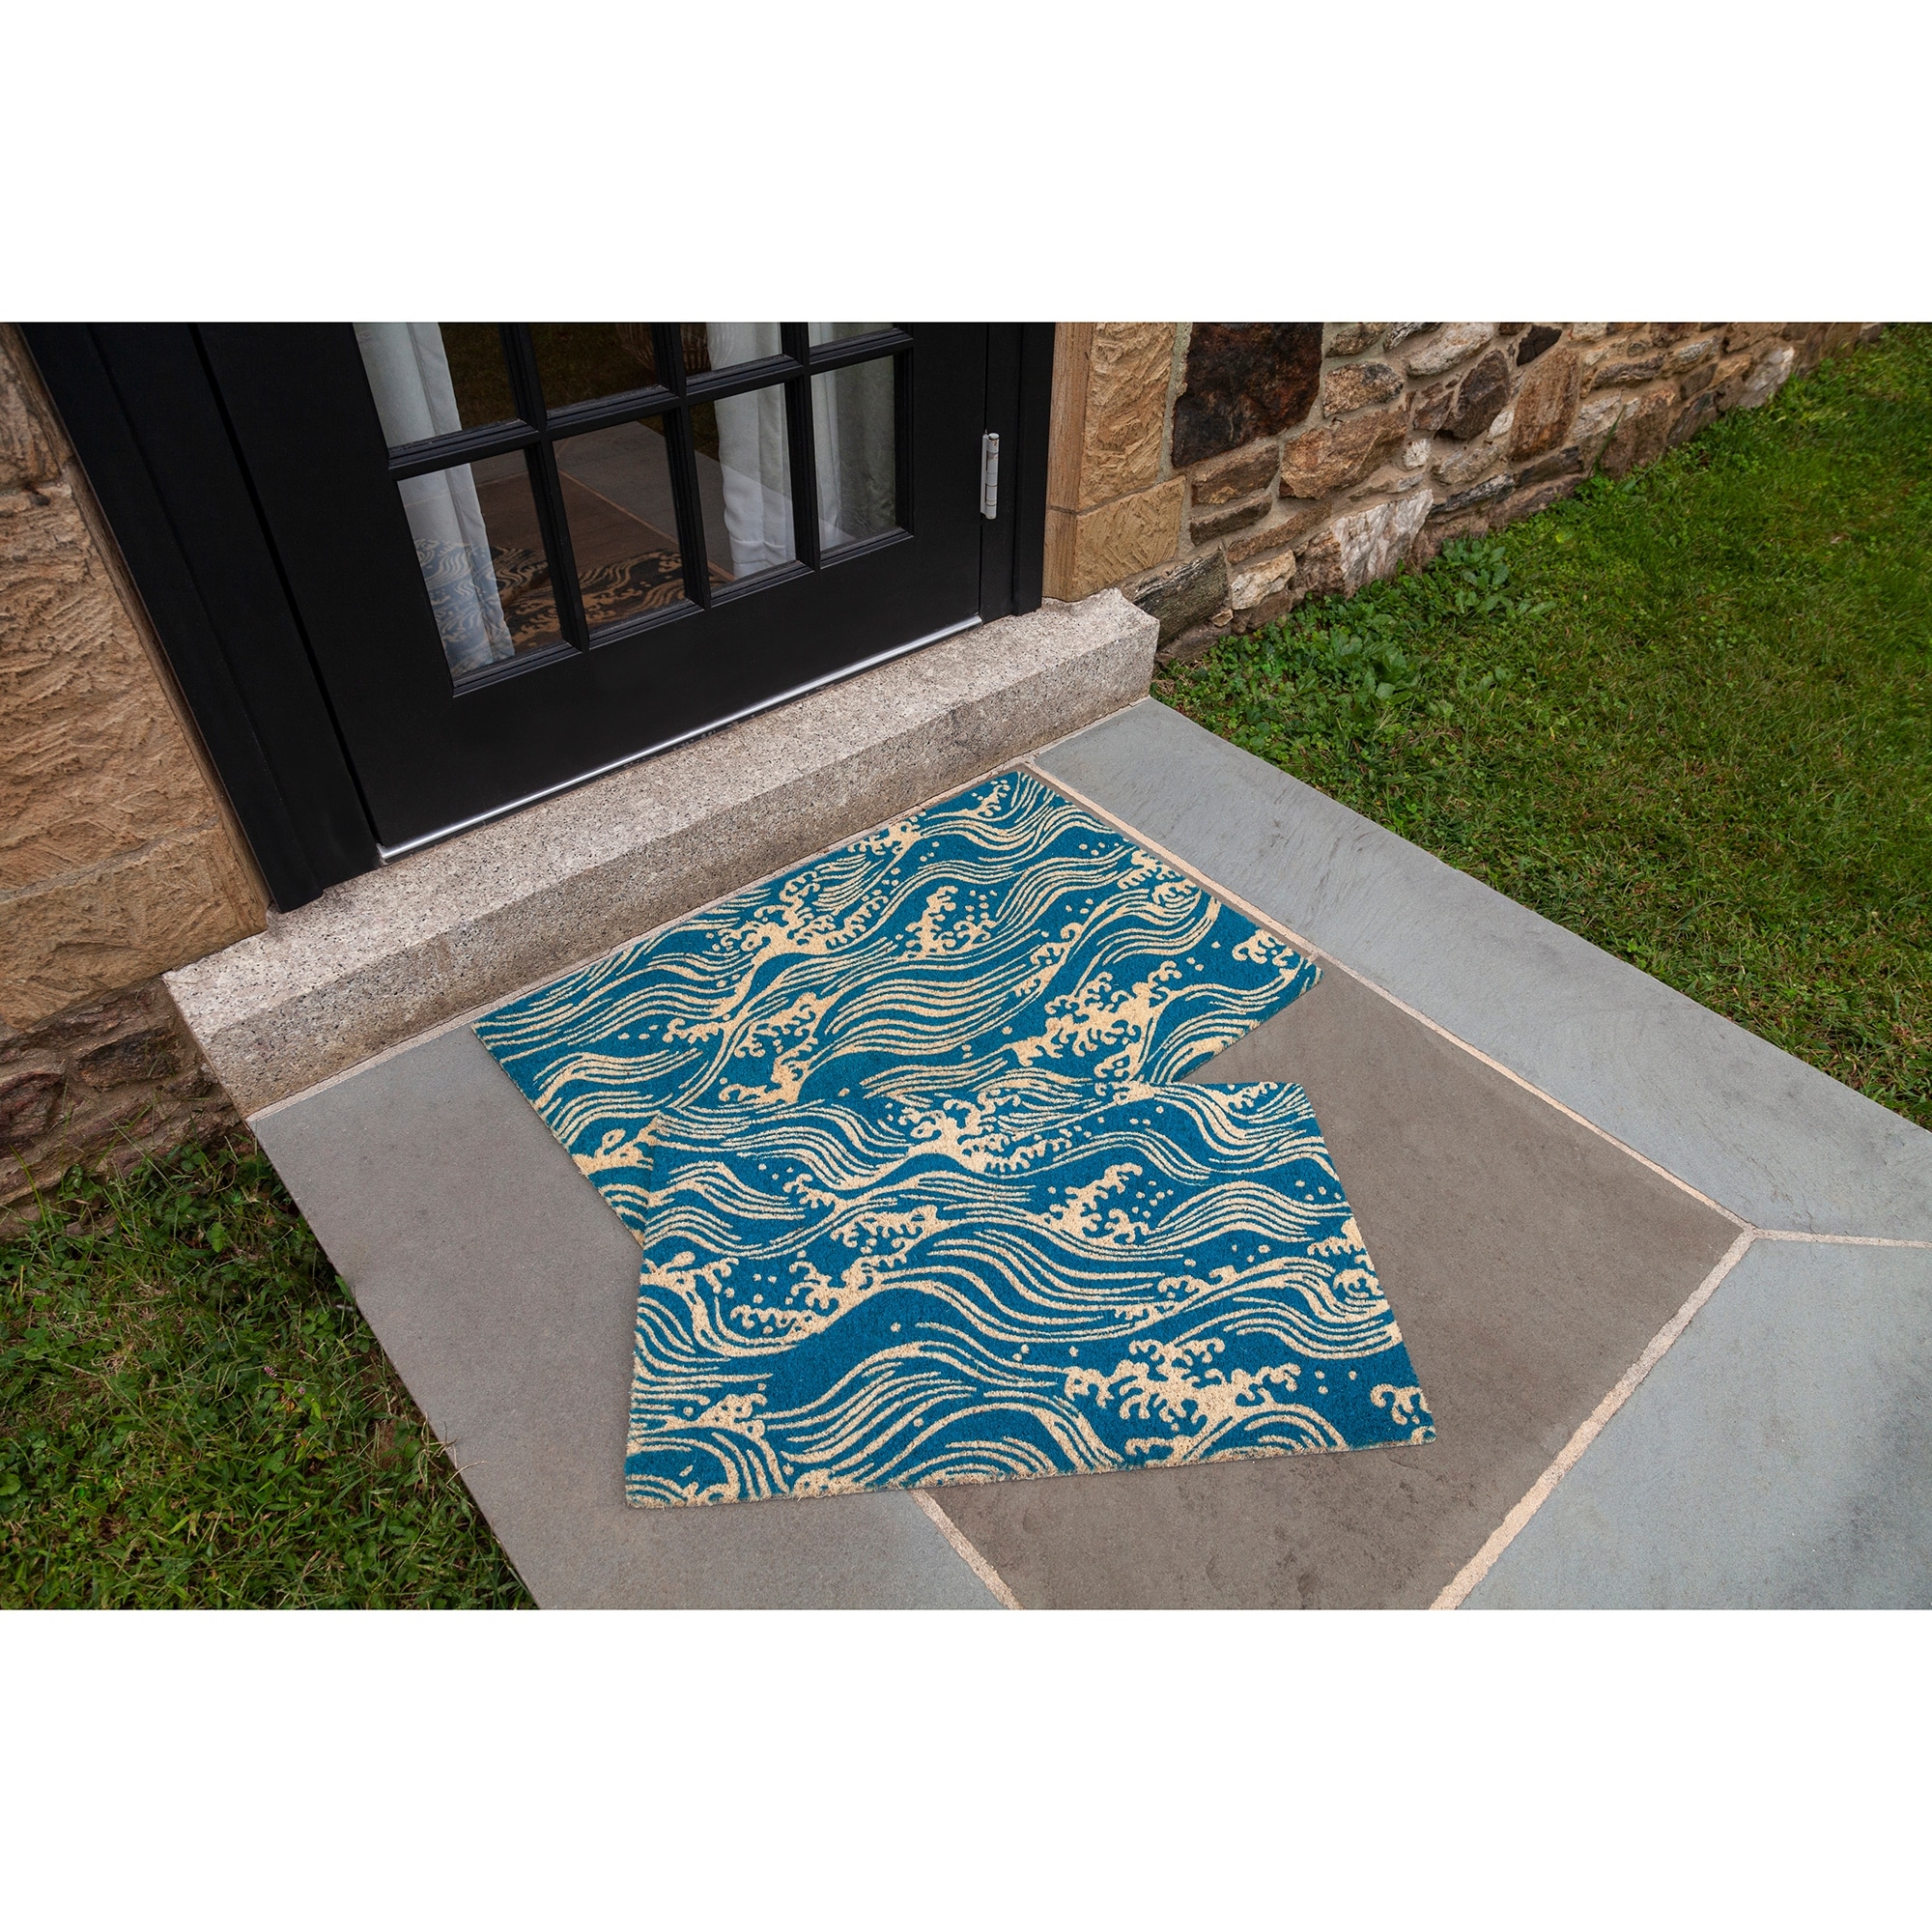 https://ak1.ostkcdn.com/images/products/is/images/direct/c3071117fcd66c3fb78f82f80ac7caa6bb24a211/Victoria-and-Albert-Museum-Waves-Coir-Doormat.jpg